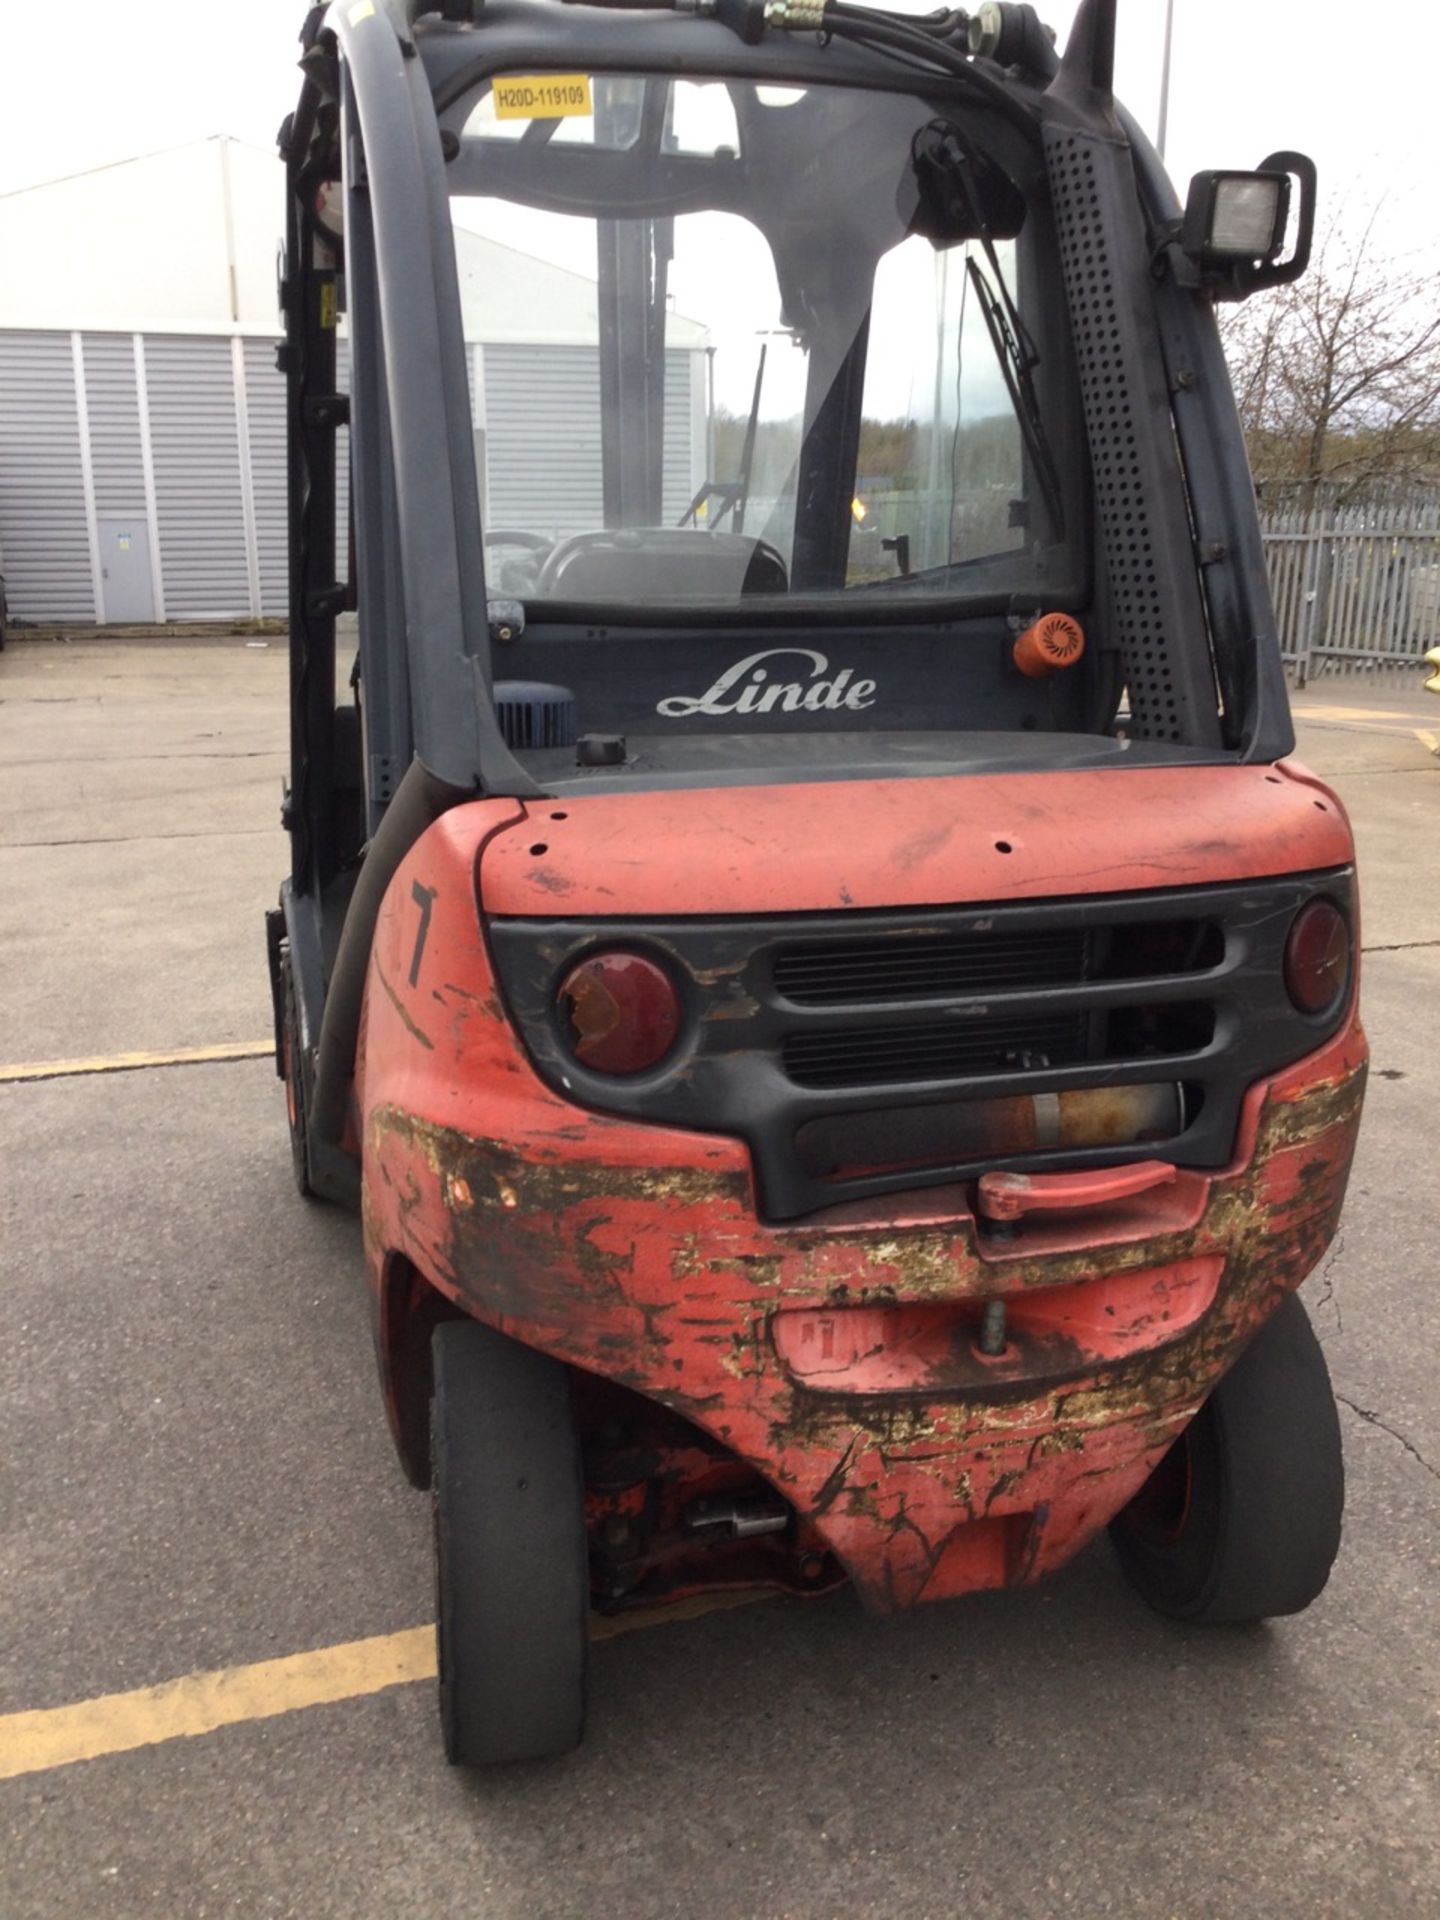 Linde H20D Counterbalance Diesel Fuelled Fork Lift Truck With Two Stage Mast And Sideshift, 18919hrs - Image 2 of 4